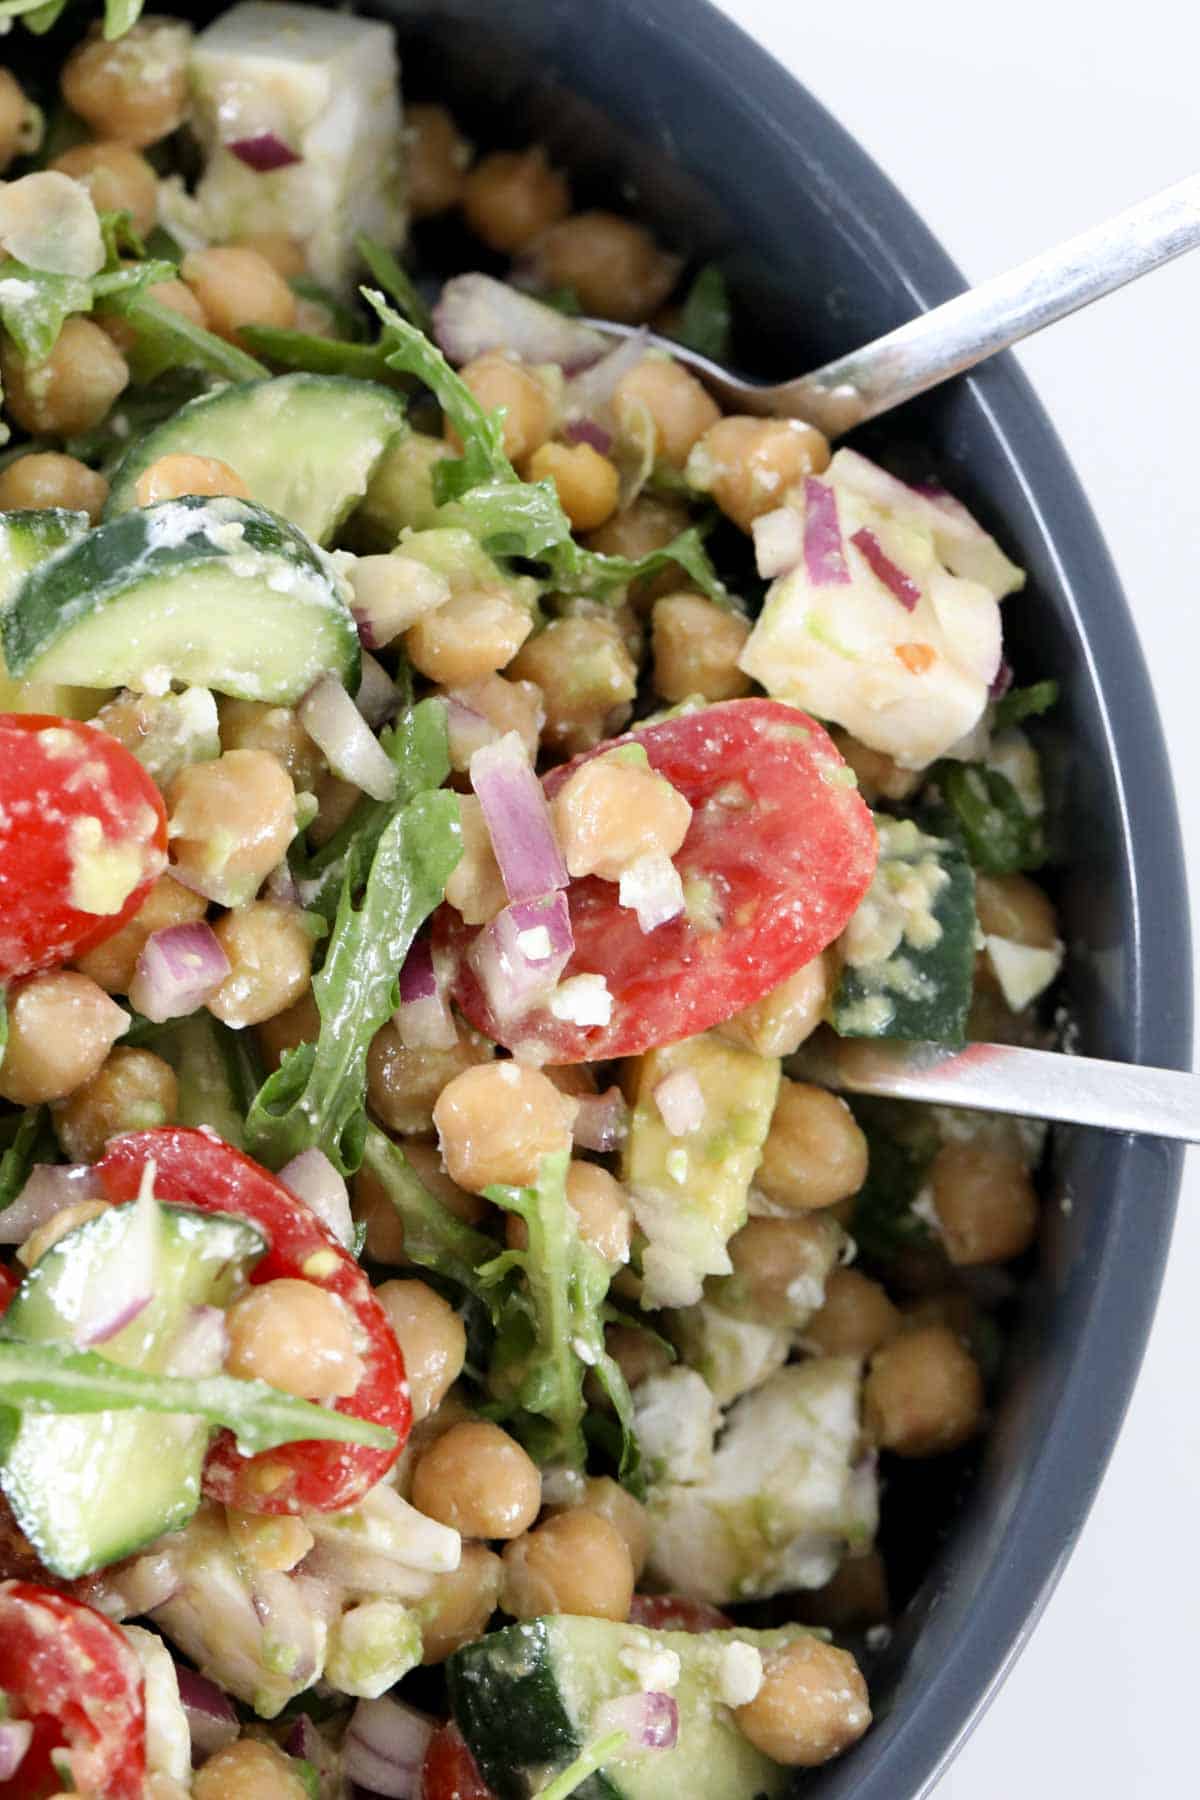 Chickpea and avocado salad in a serving bowl with salad servers.